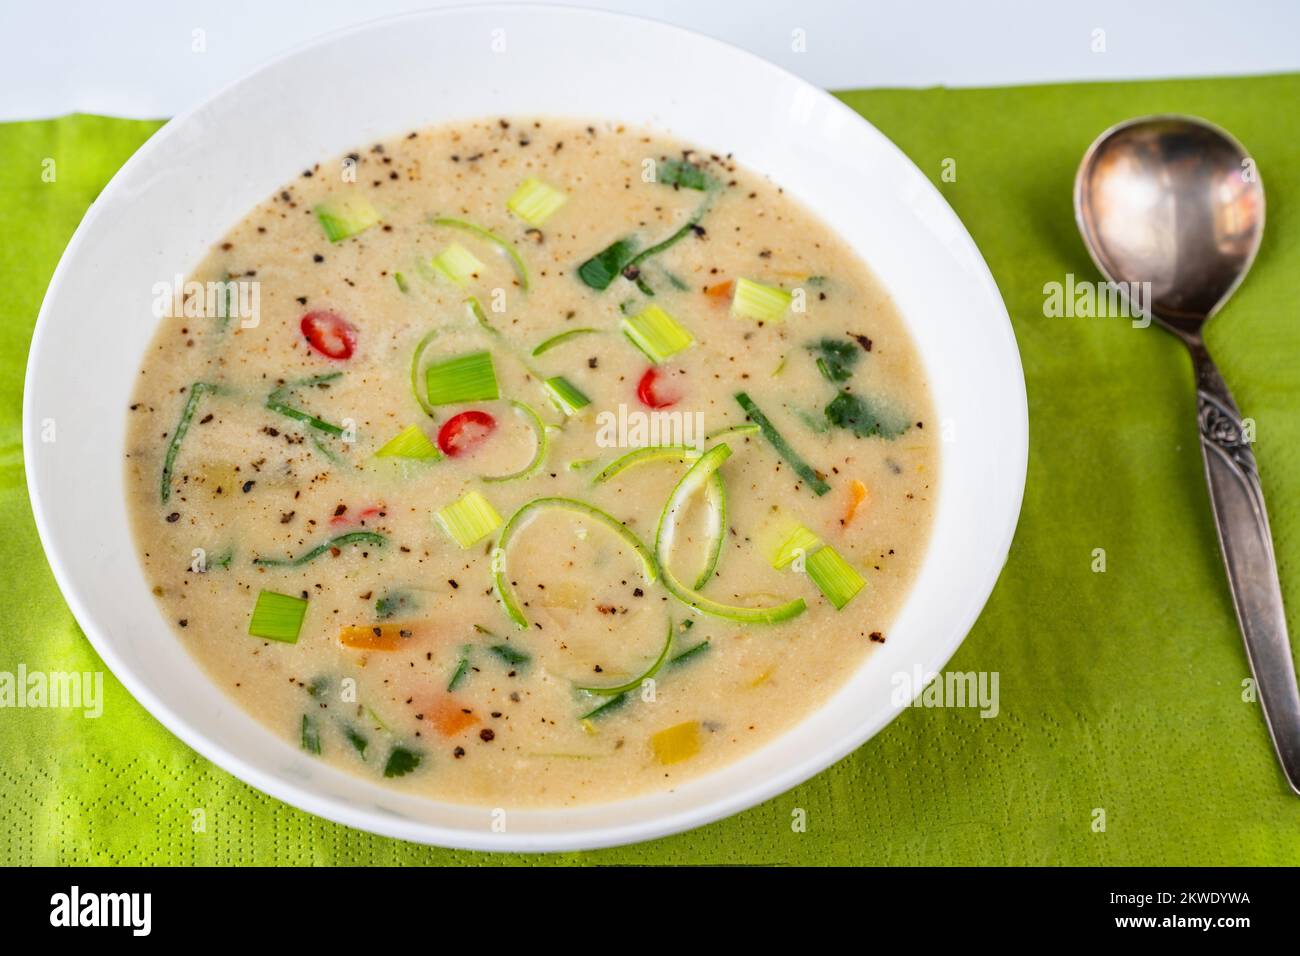 Dense leek soup with chilli pepper in white plate, spoon, fresh green background, closeup. Stock Photo